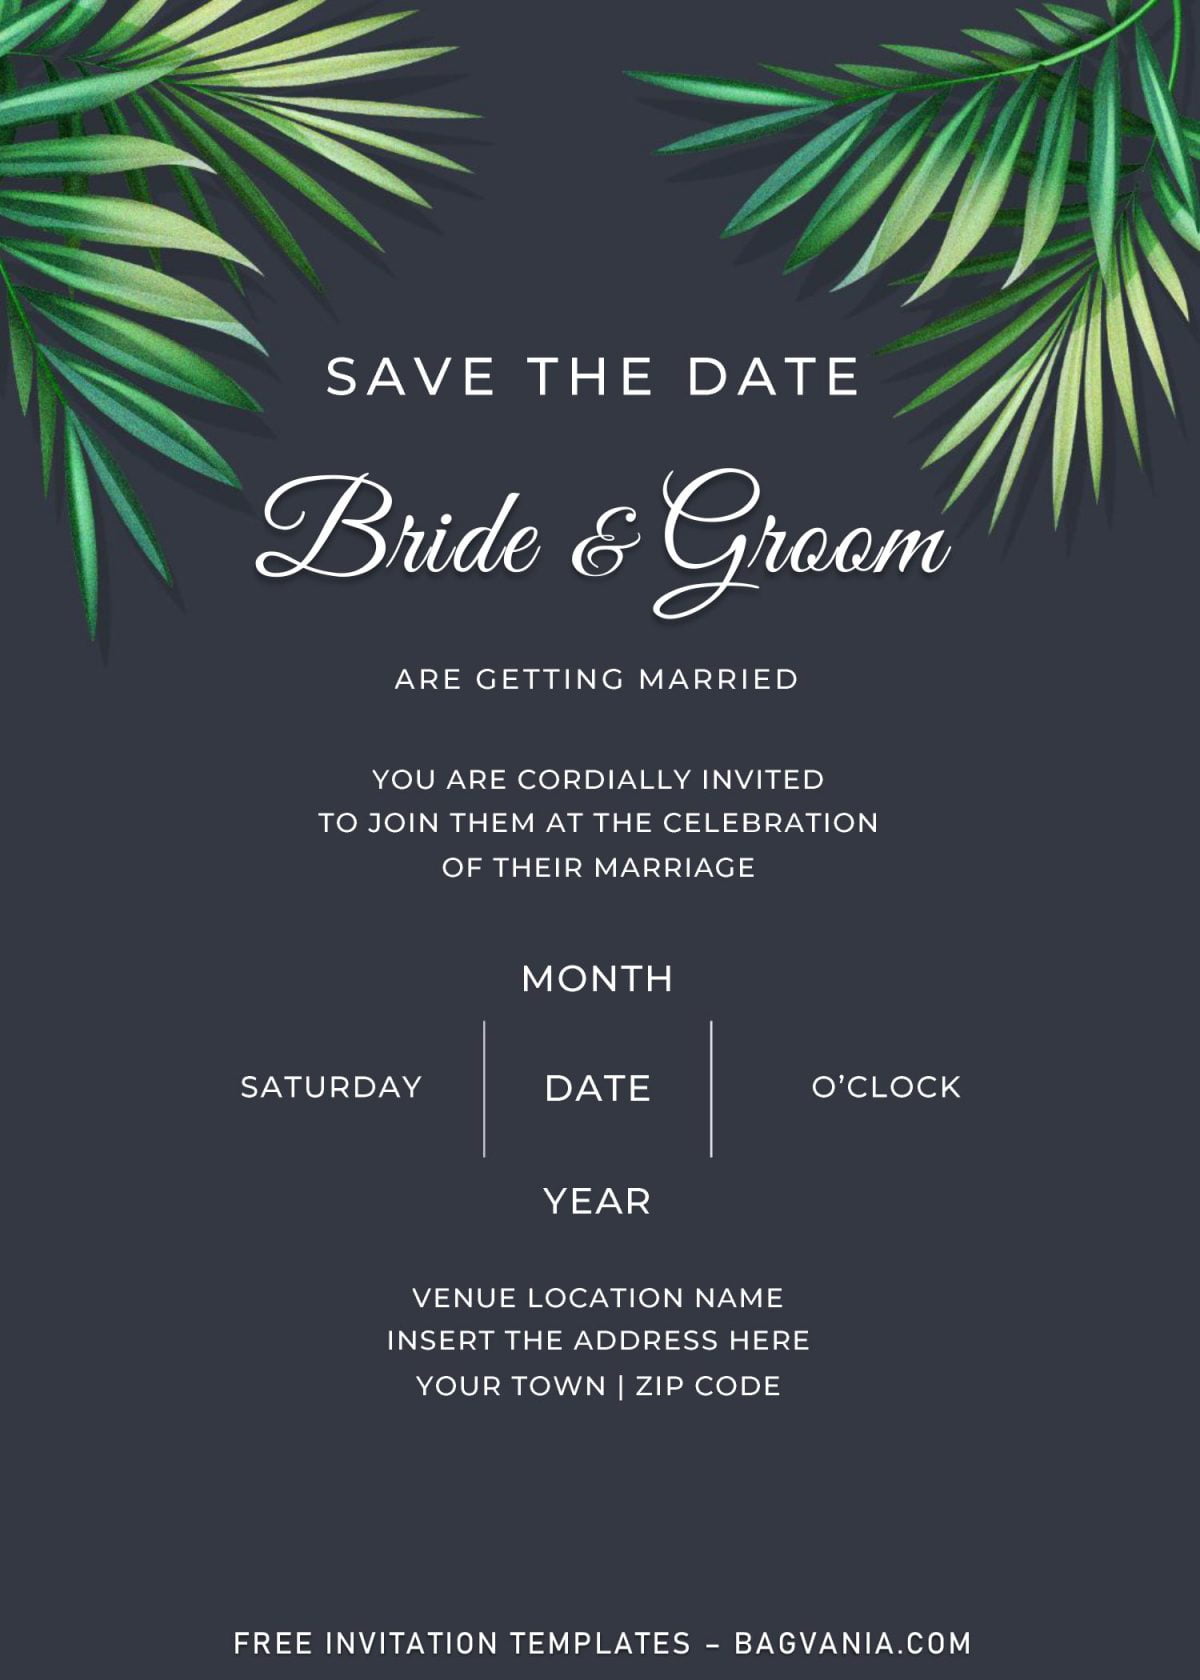 Free Greenery Wedding Invitation Templates For Word and has dark gray background